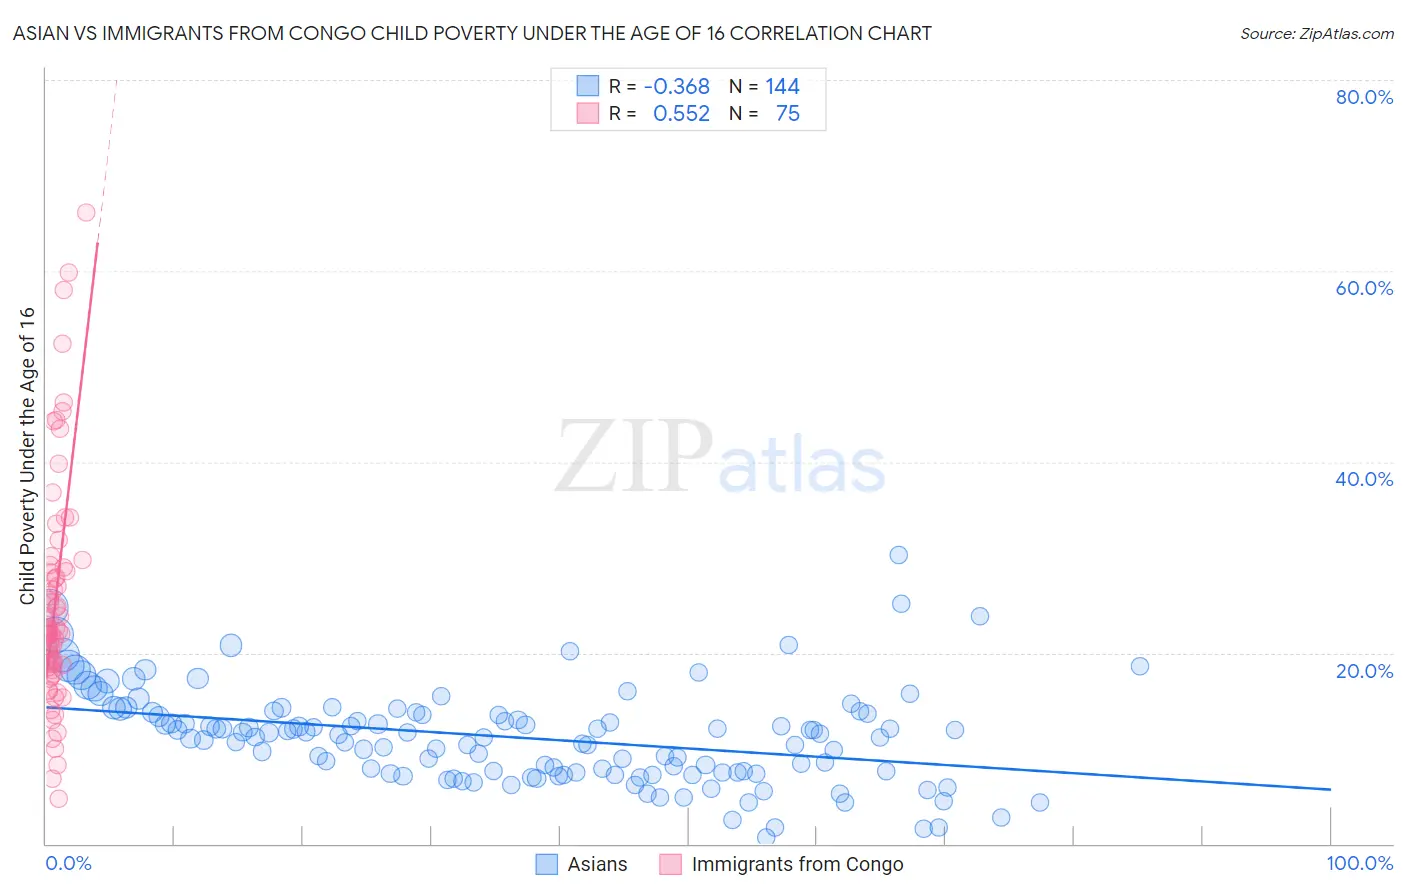 Asian vs Immigrants from Congo Child Poverty Under the Age of 16